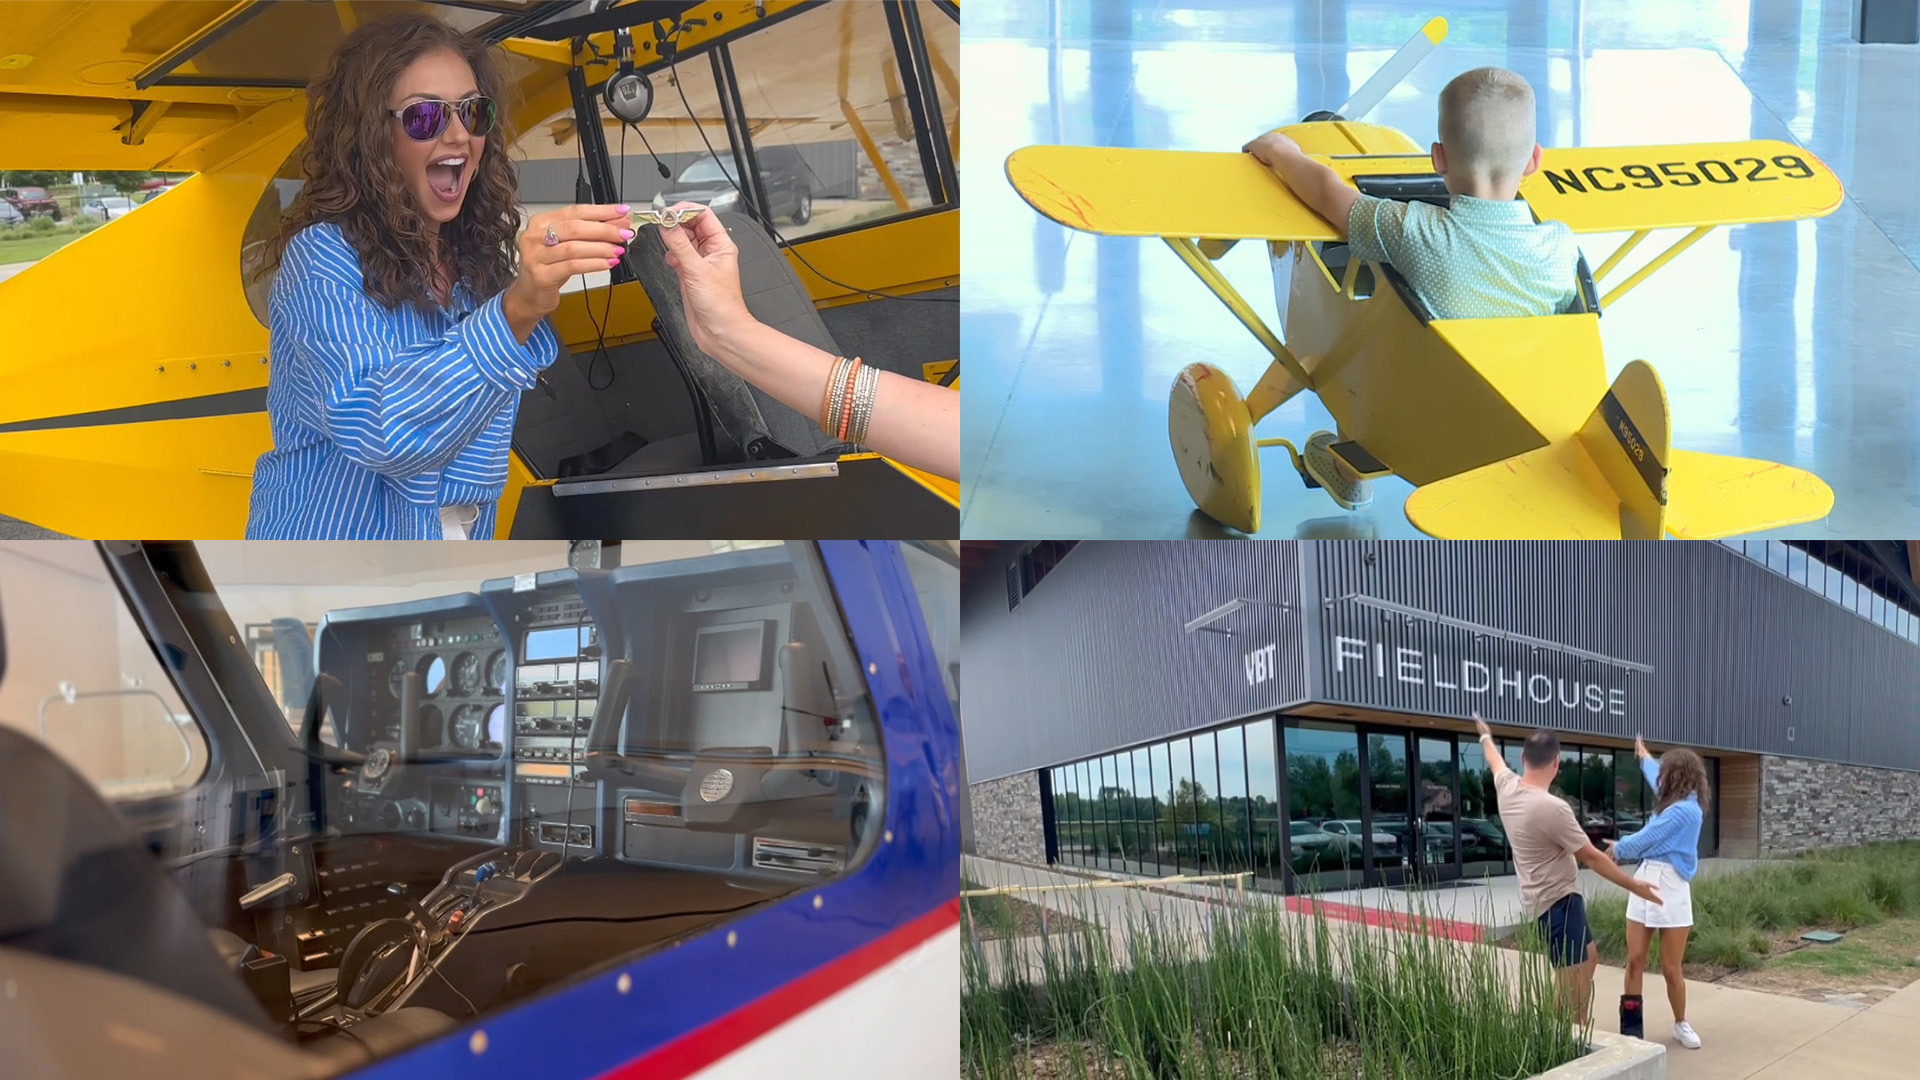 The 5NEWS morning crew explored Thaden Fieldhouse, dined at Louise while watching the planes take off, and Tiffany went up in the air for a personal scenic tour.